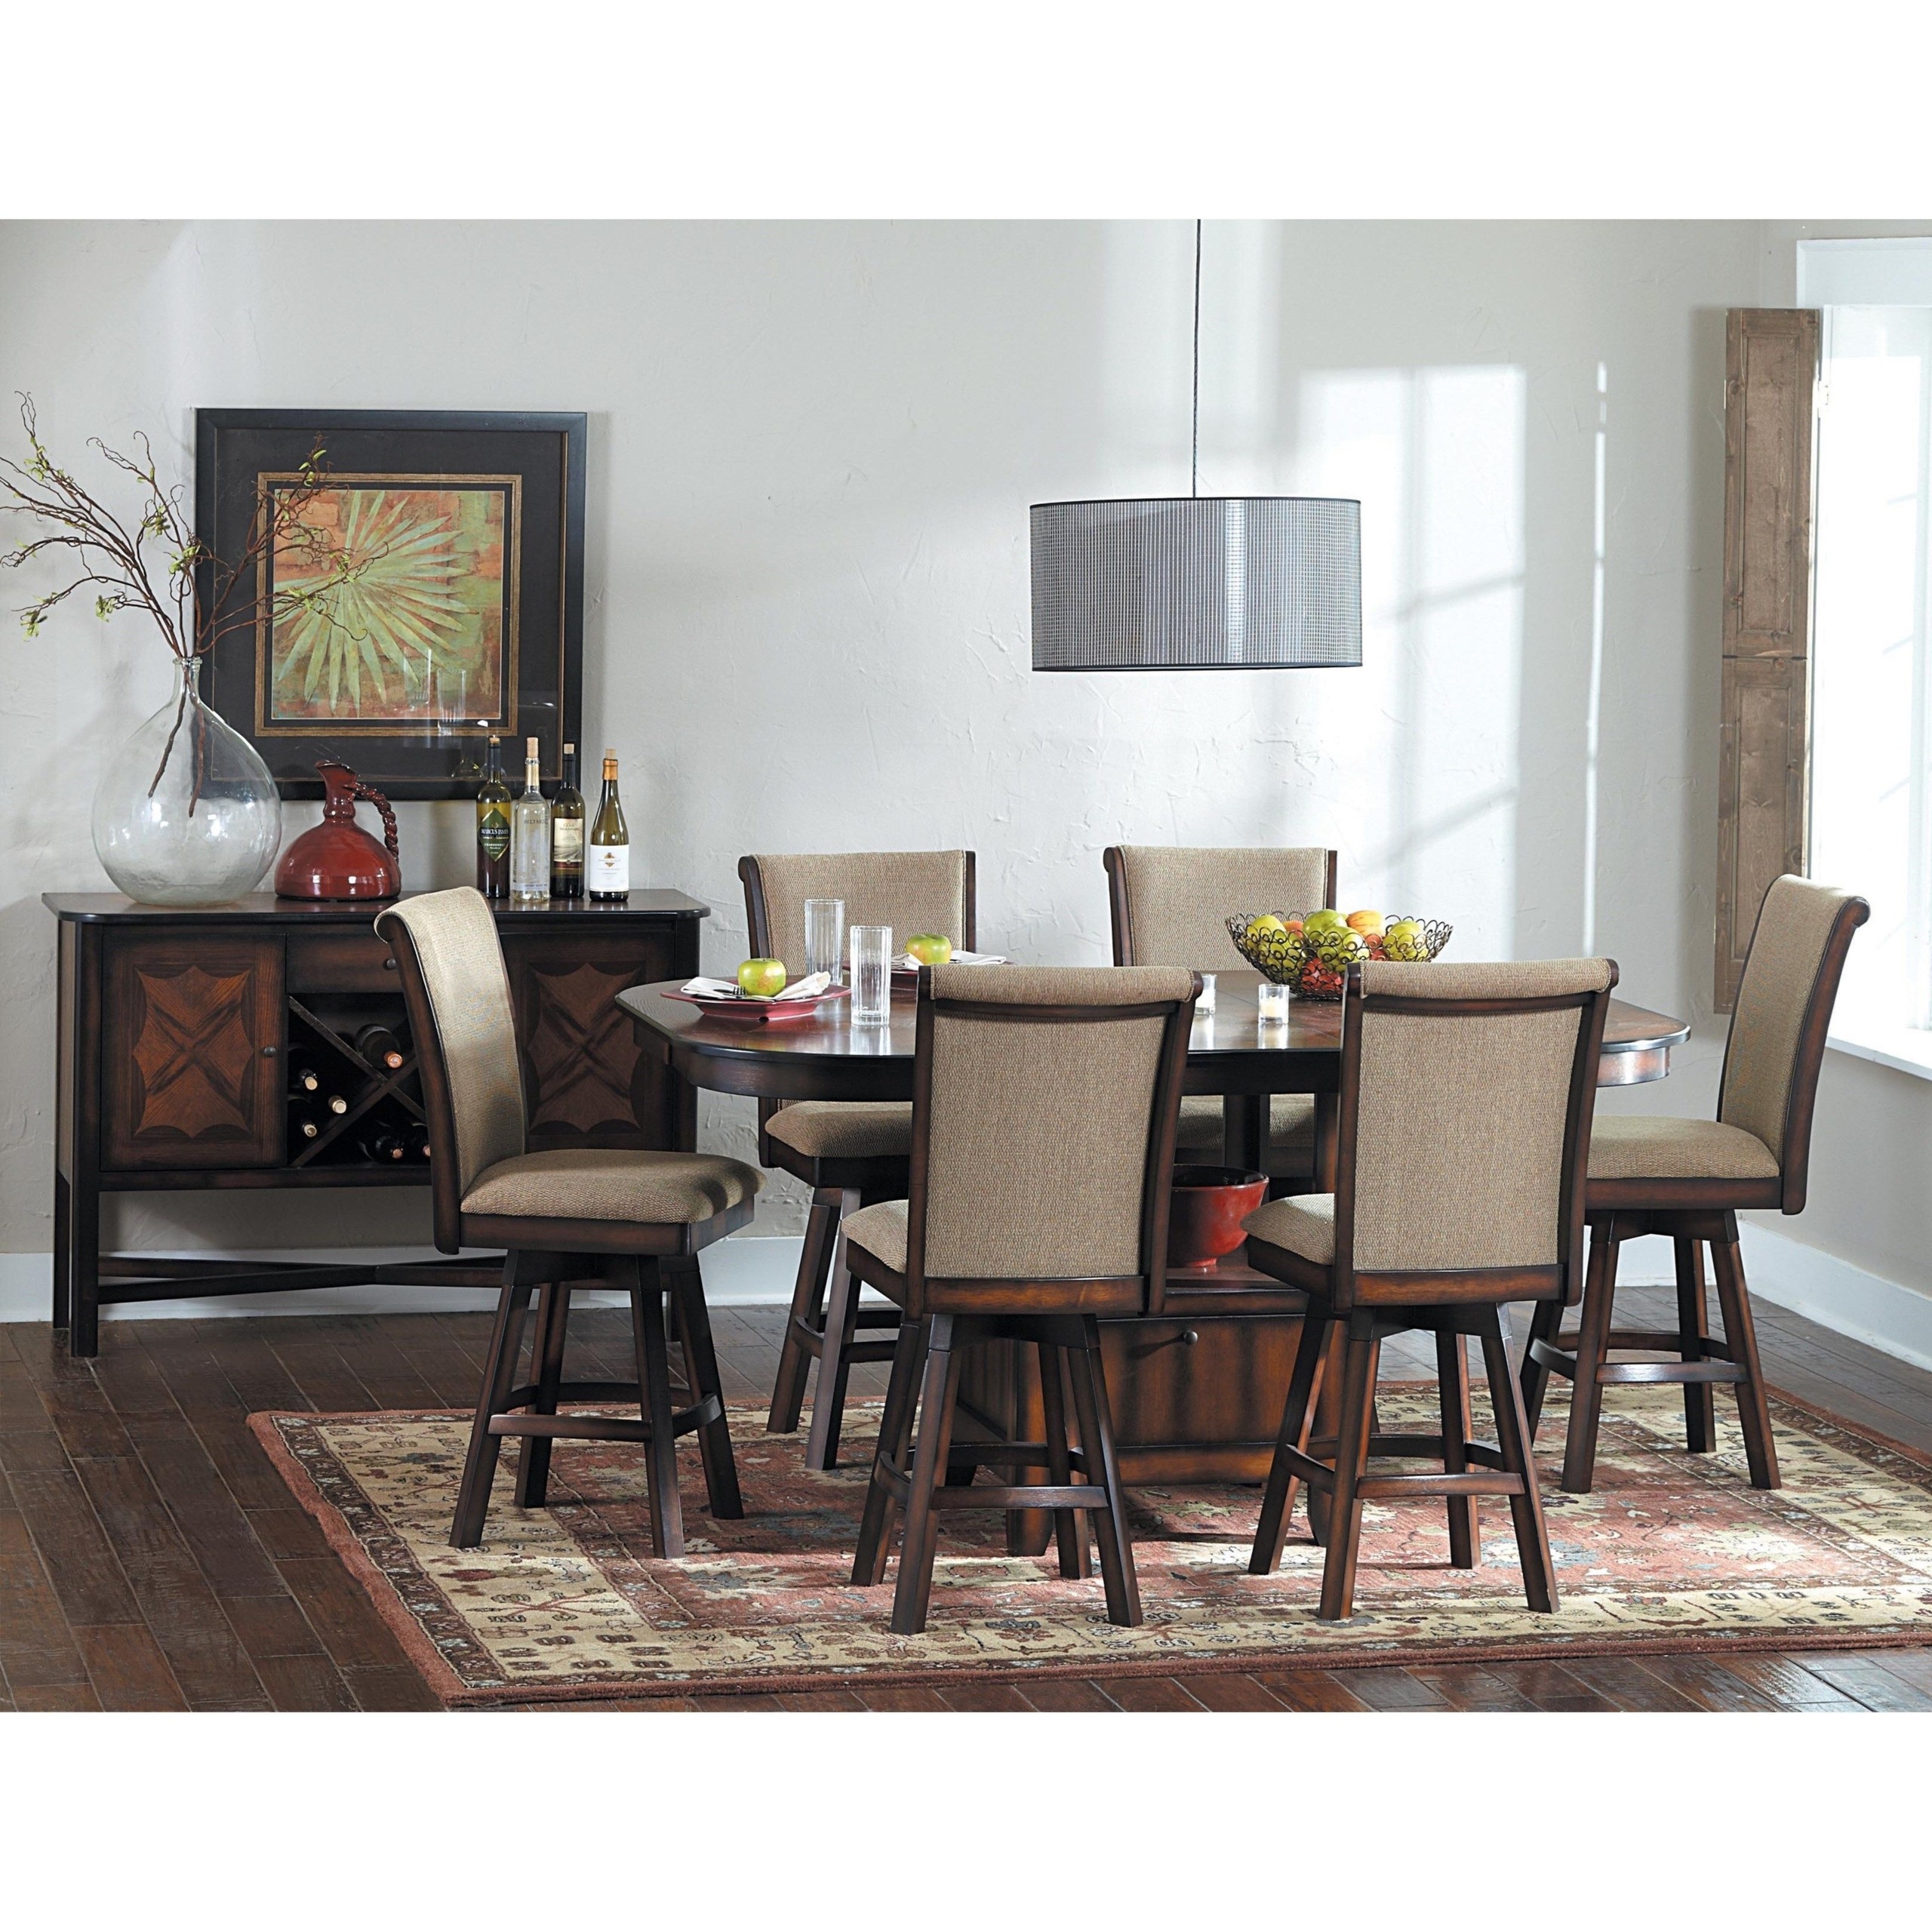 Glenbrook 7 piece counter height dining set with swivel chairs